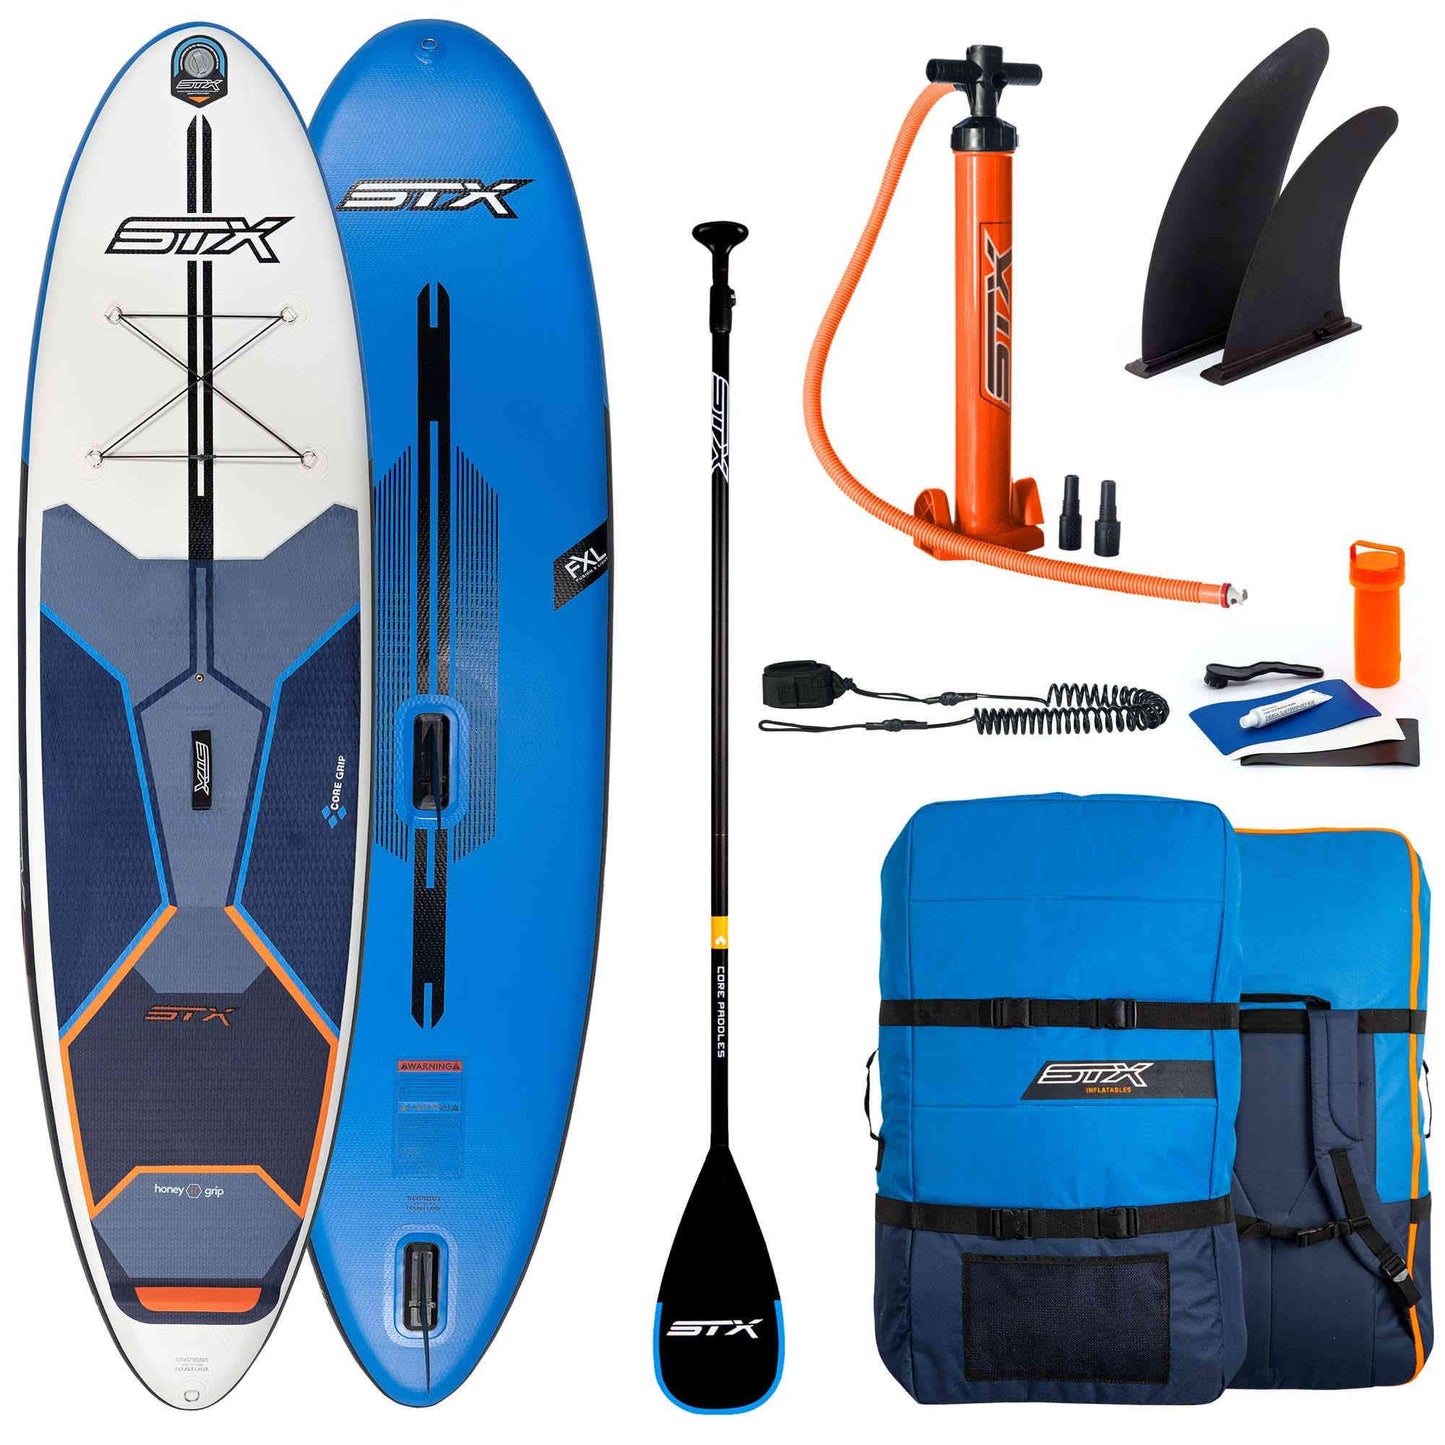 STX 11.0 WING/SUP/WINDSURF CROSSOVER - Poole Harbour Watersports